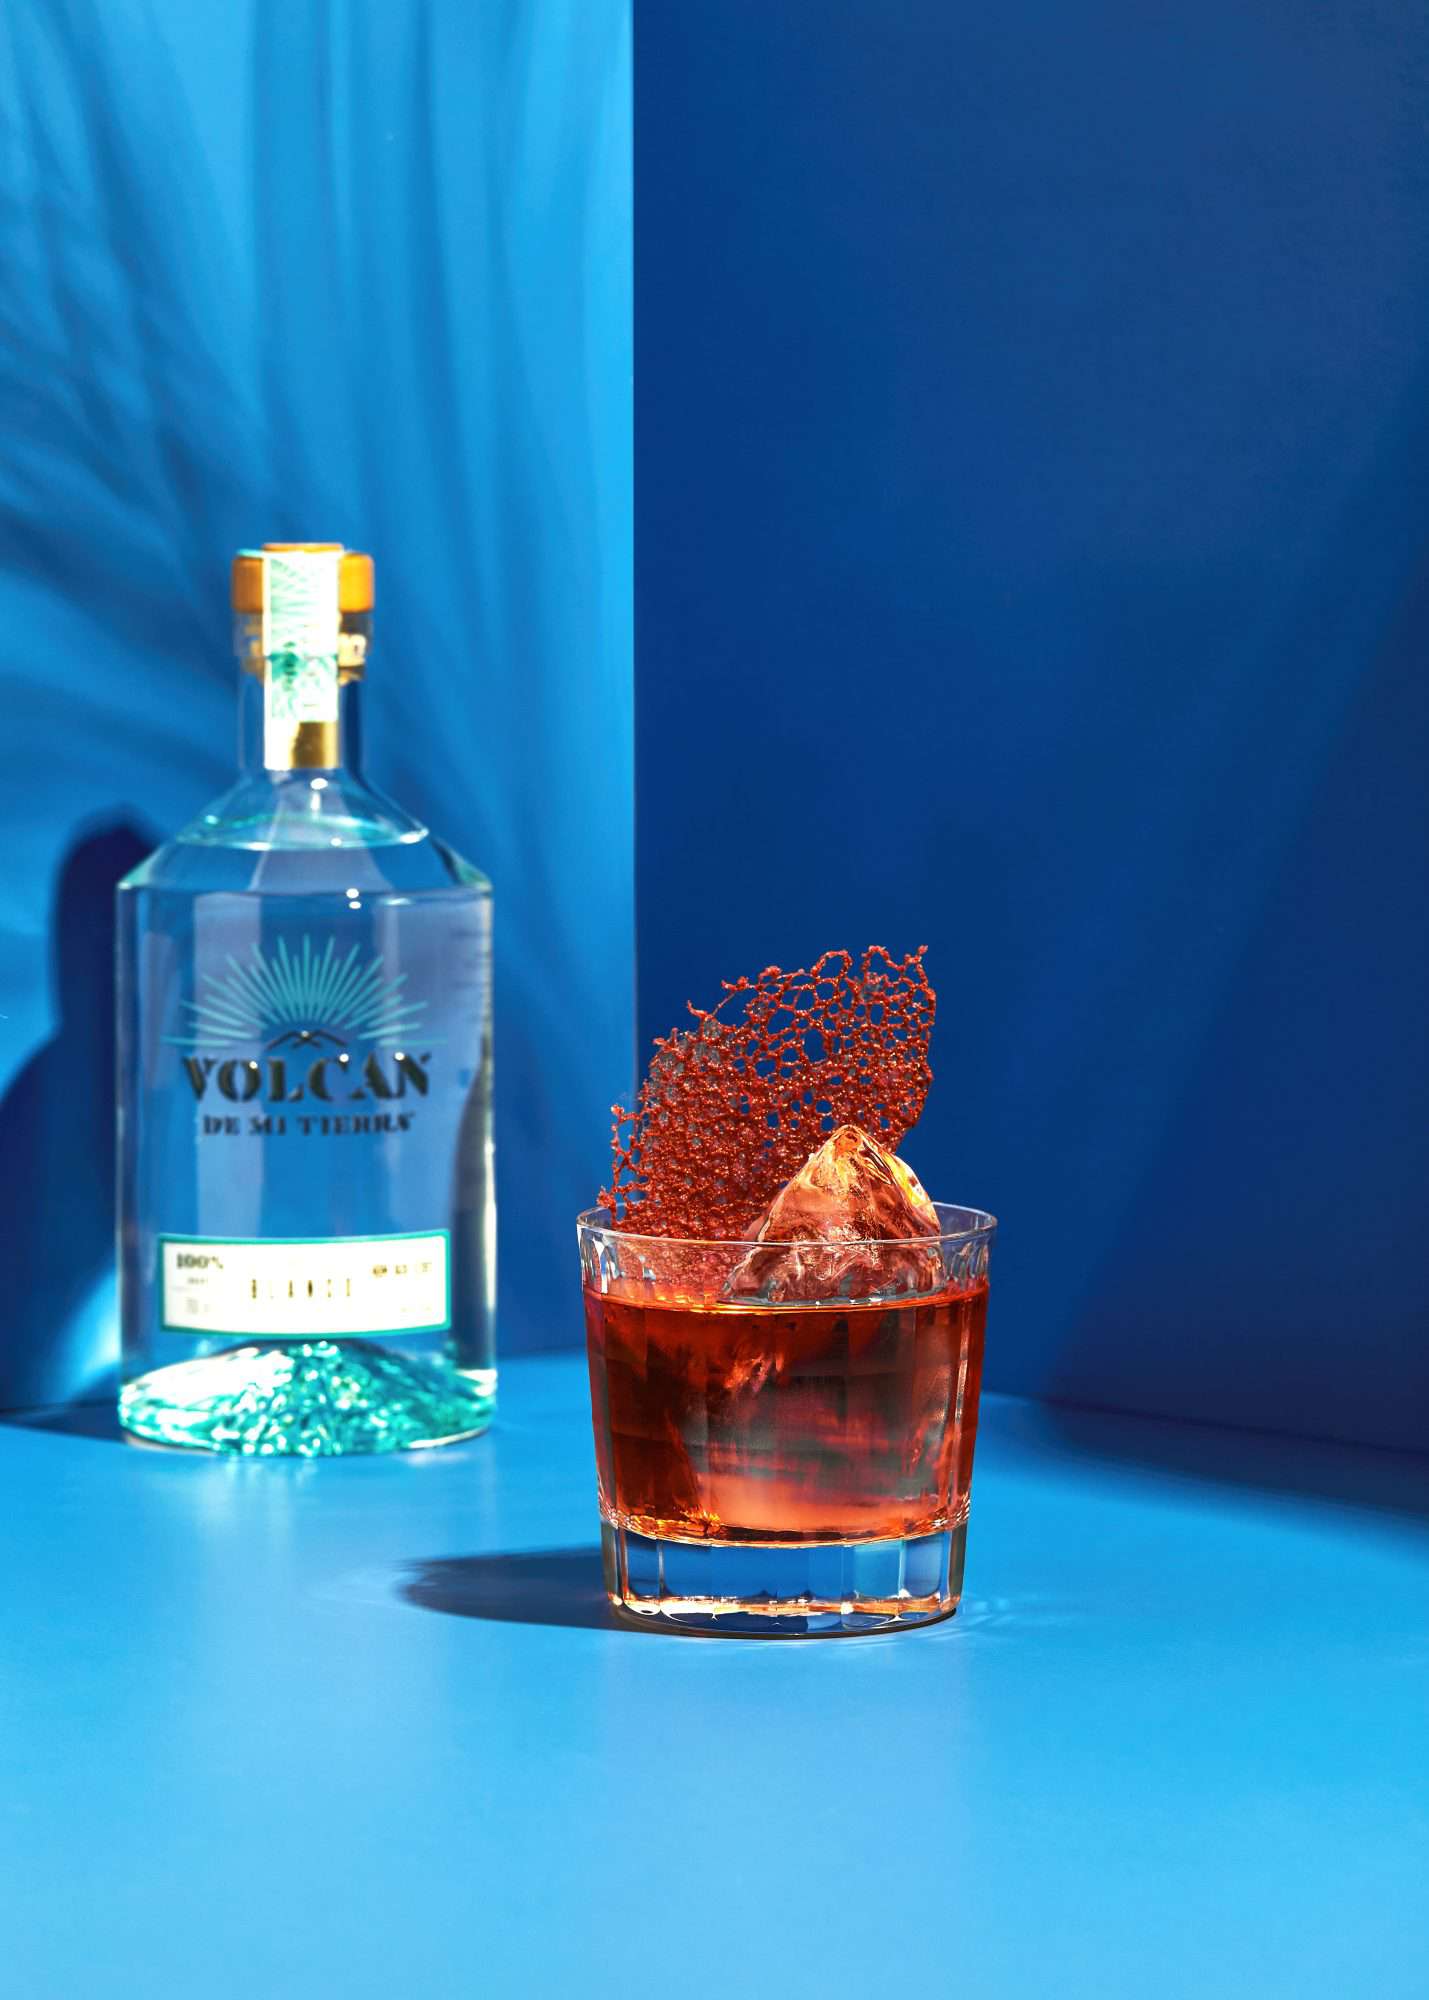 Volcan's Mexican Negroni